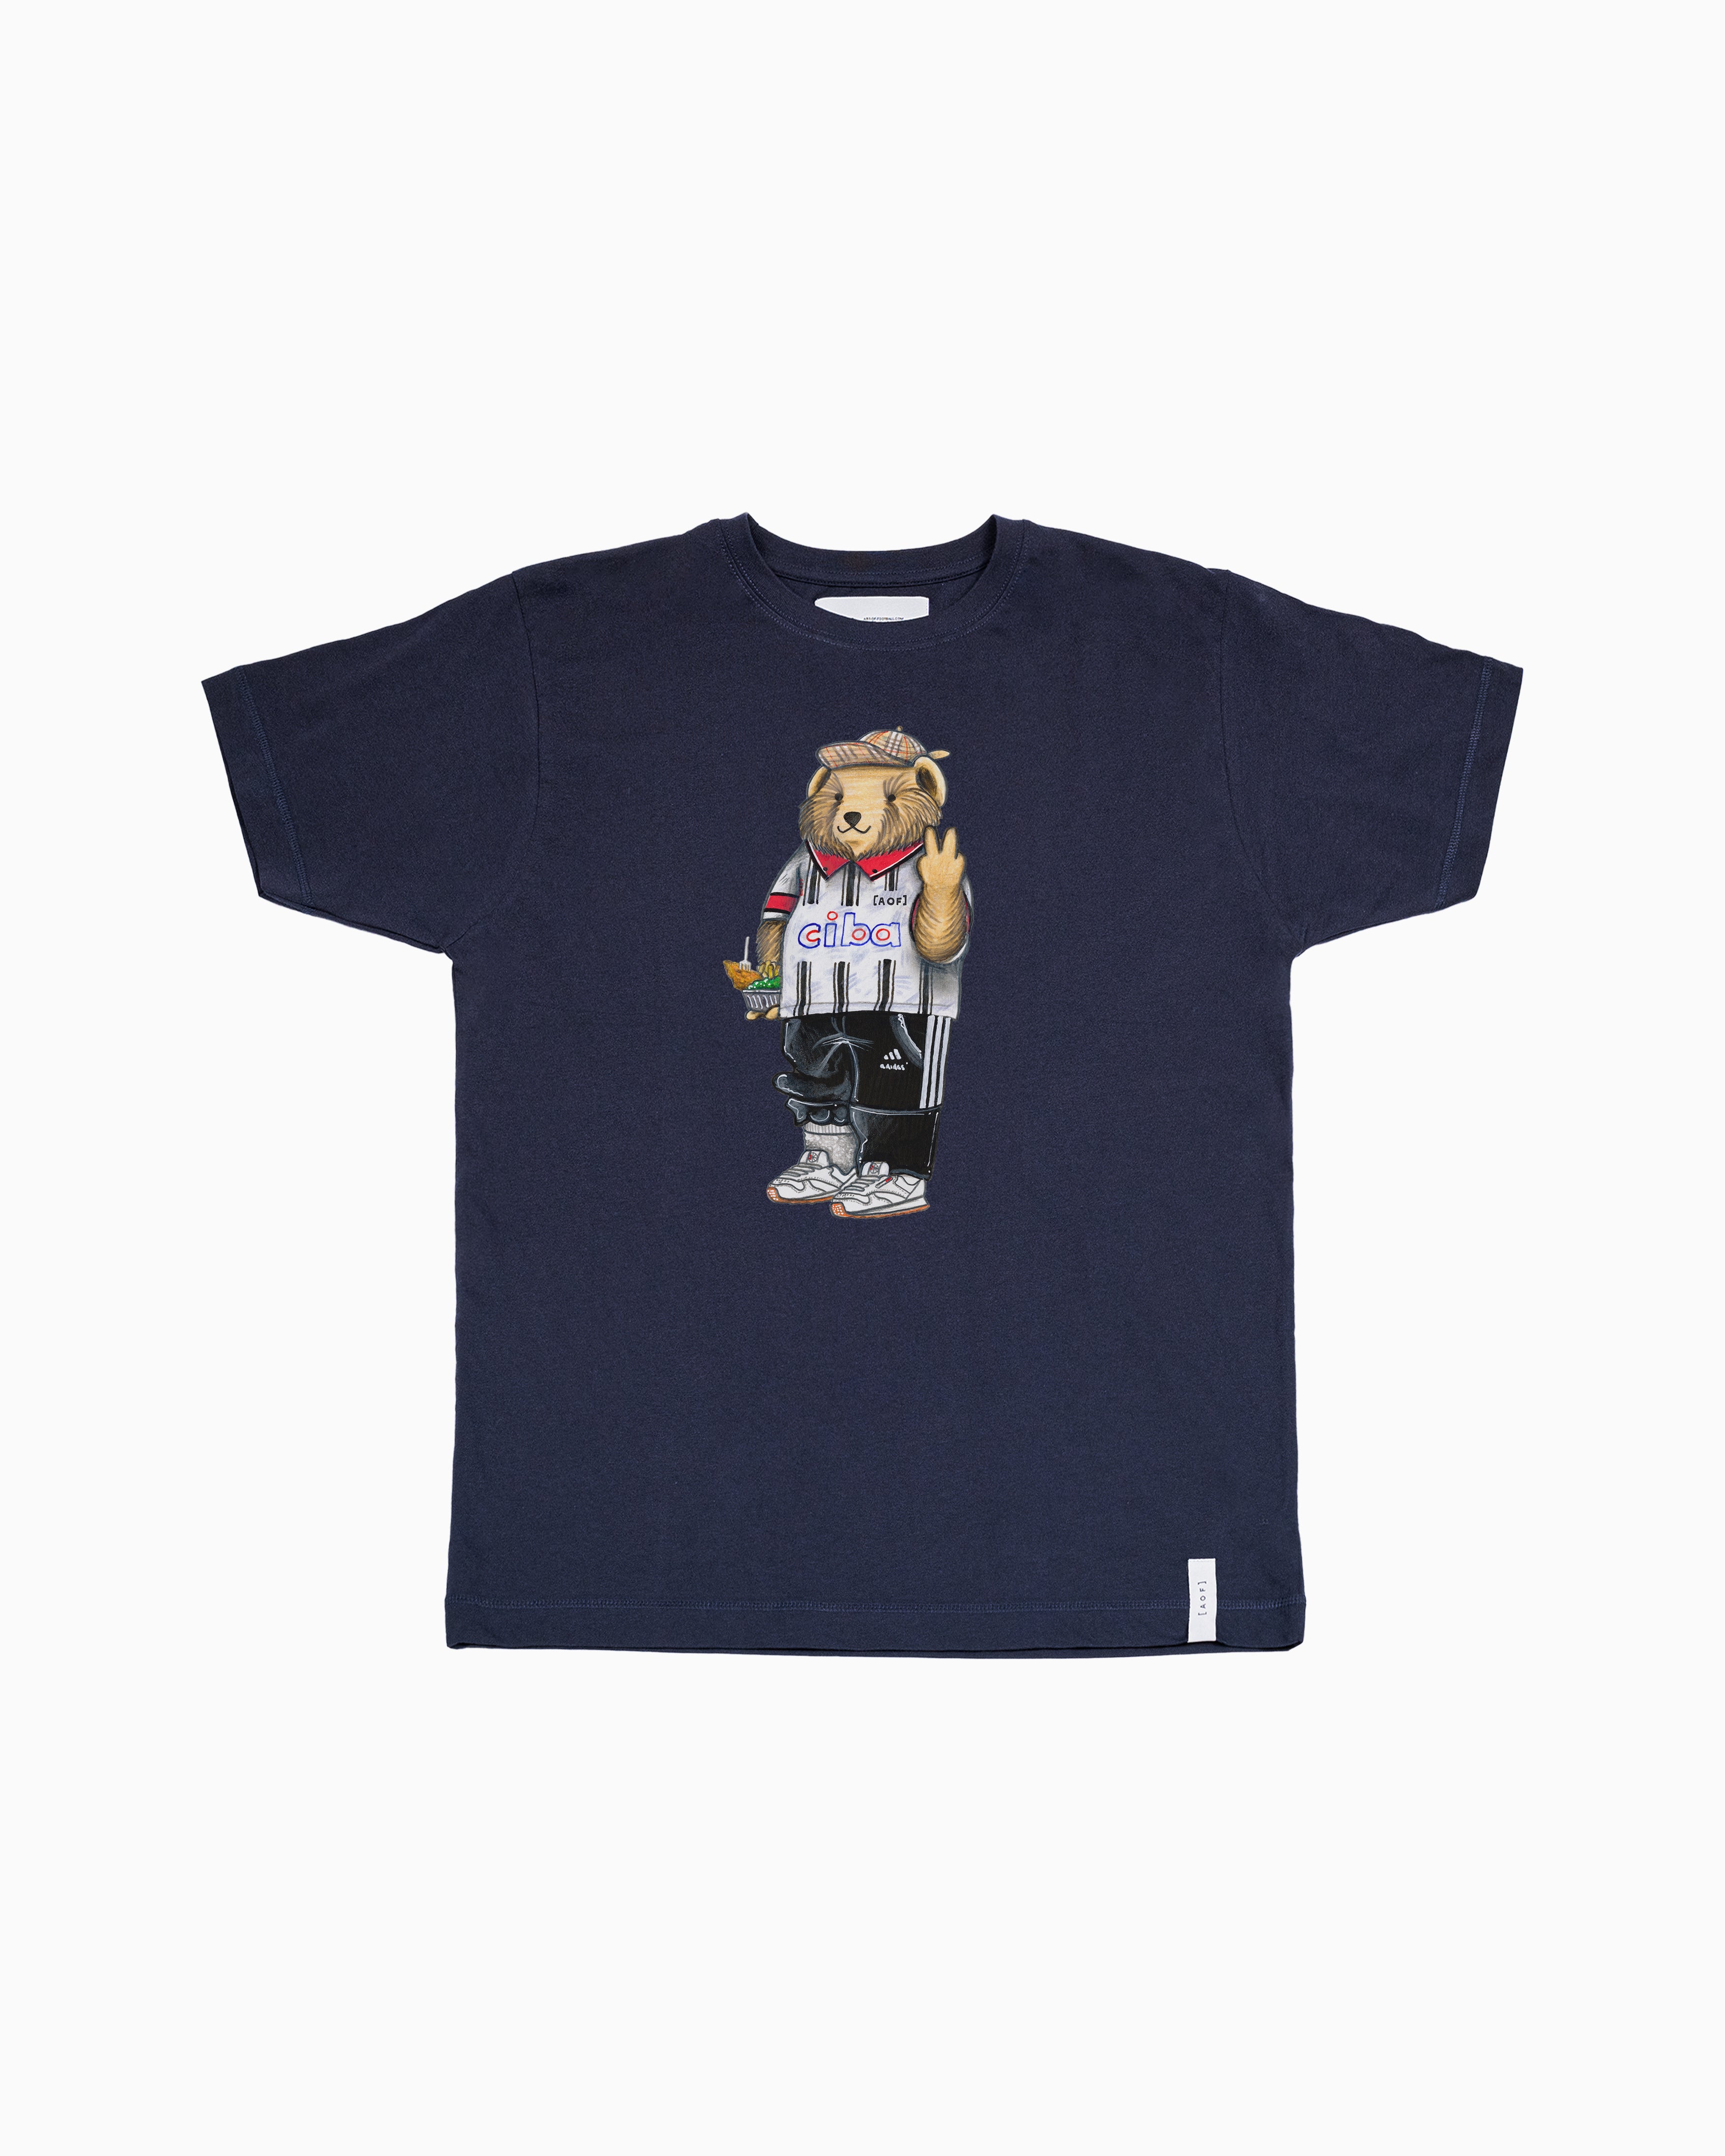 Pickles The Mariner - Tee or Sweat